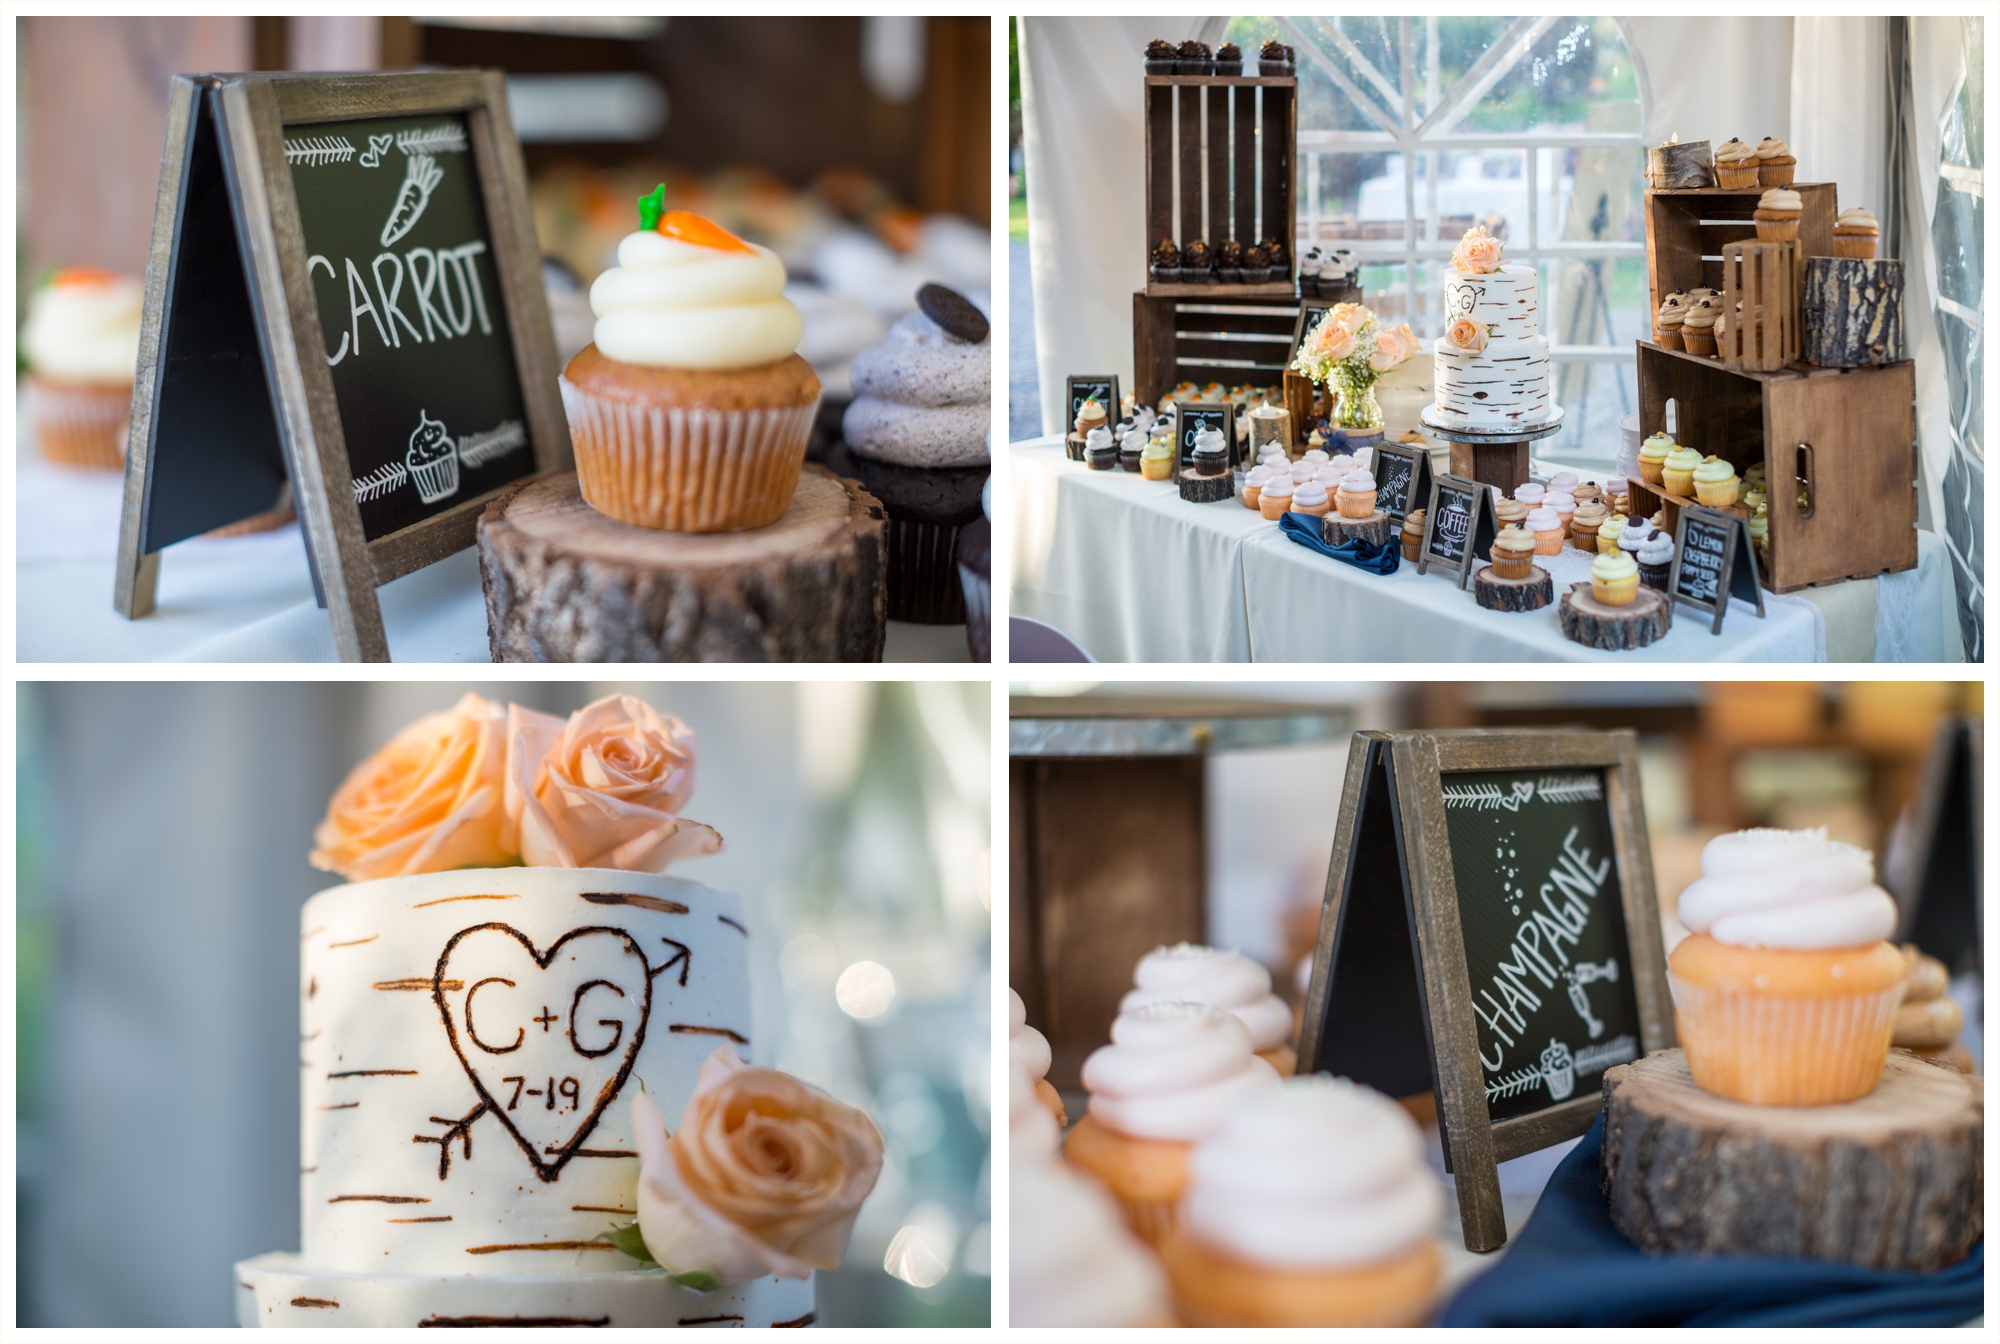 reception decor and details at stone mountain lodge. cupcakes and cake